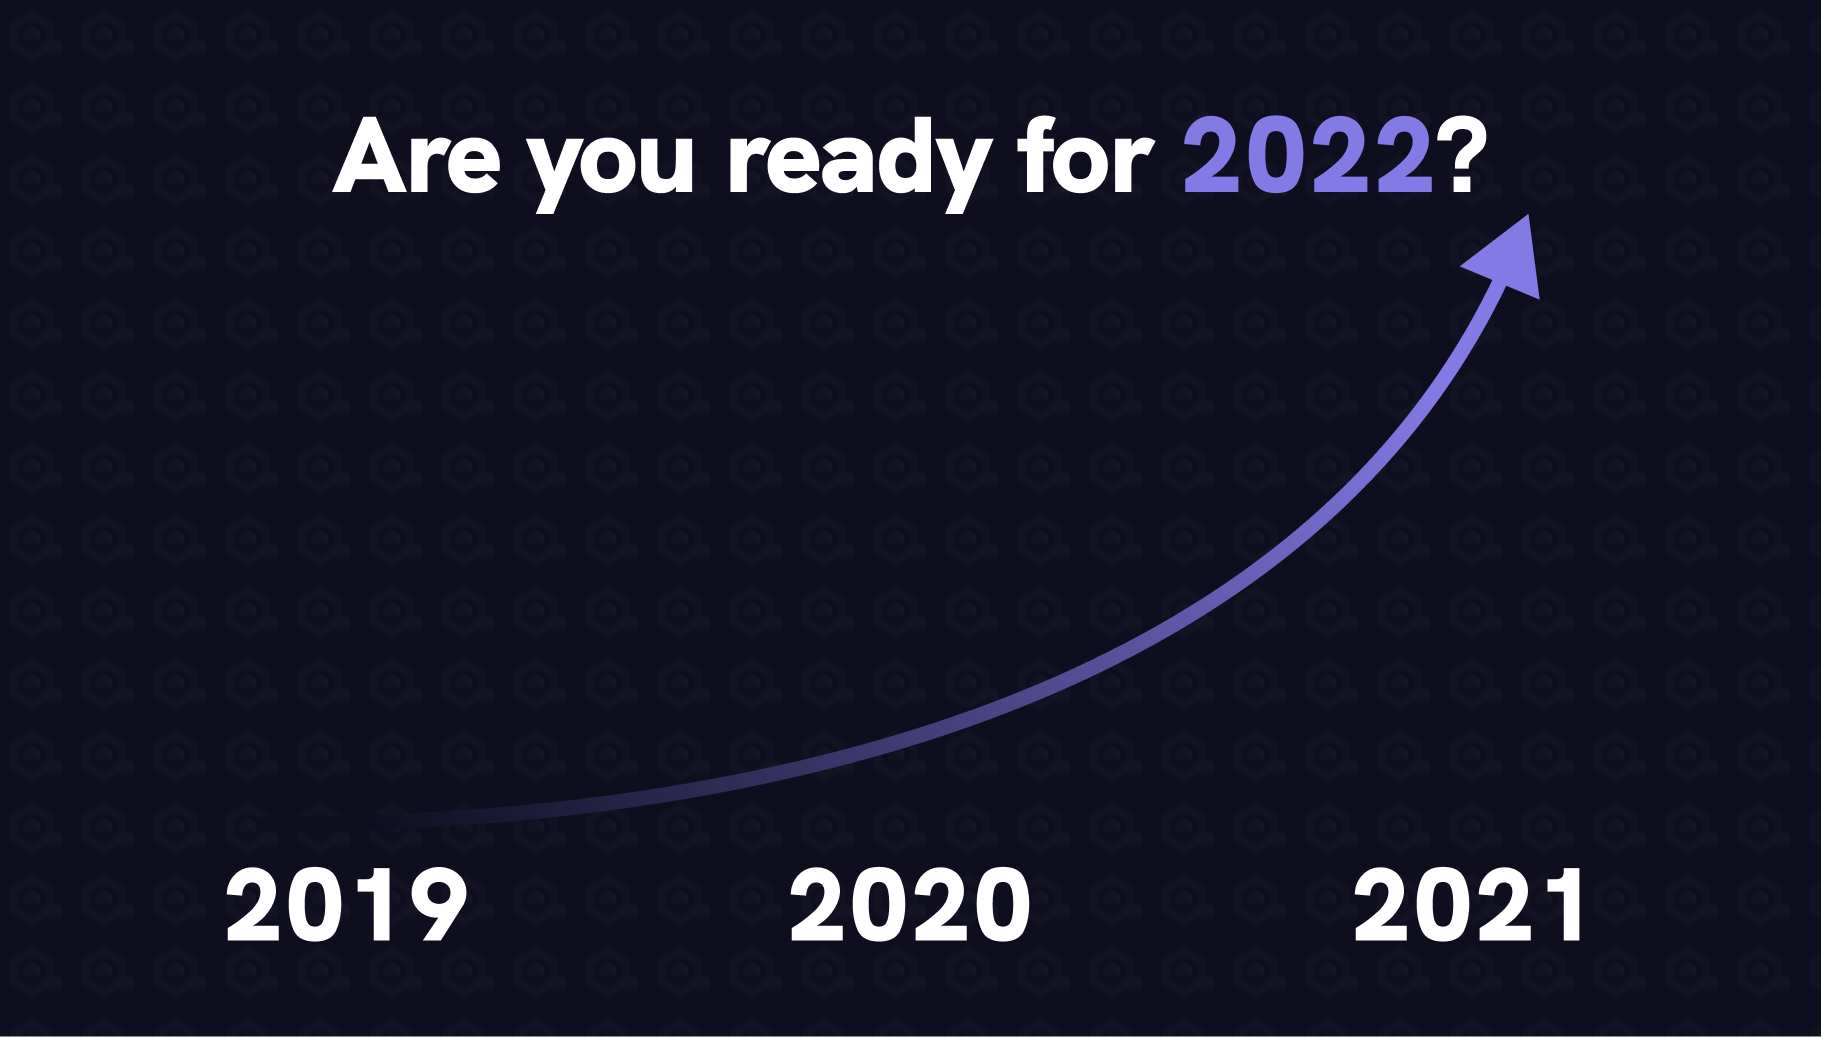 Are you ready for 2022? - Qovery